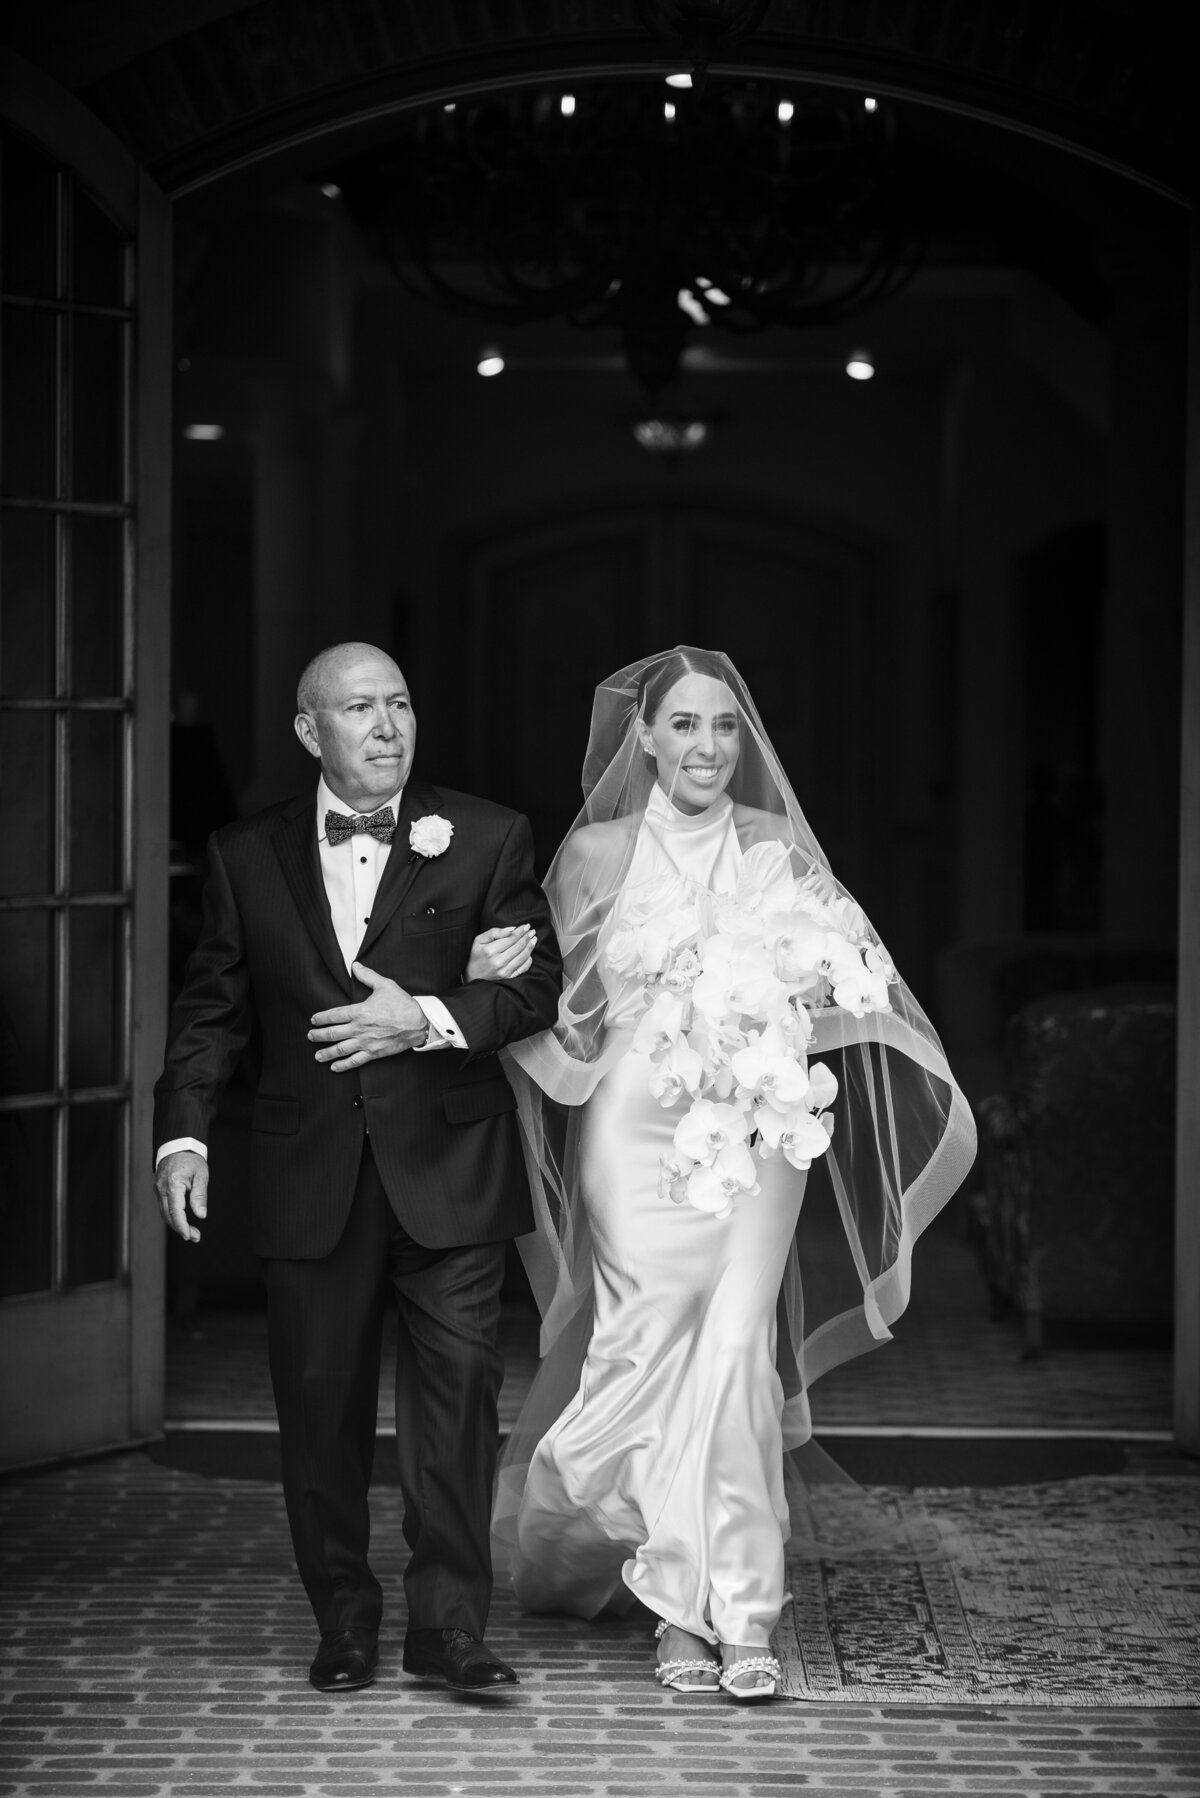 A candid moment of a bride walking up the aisle with her father with her veil draped over her face.